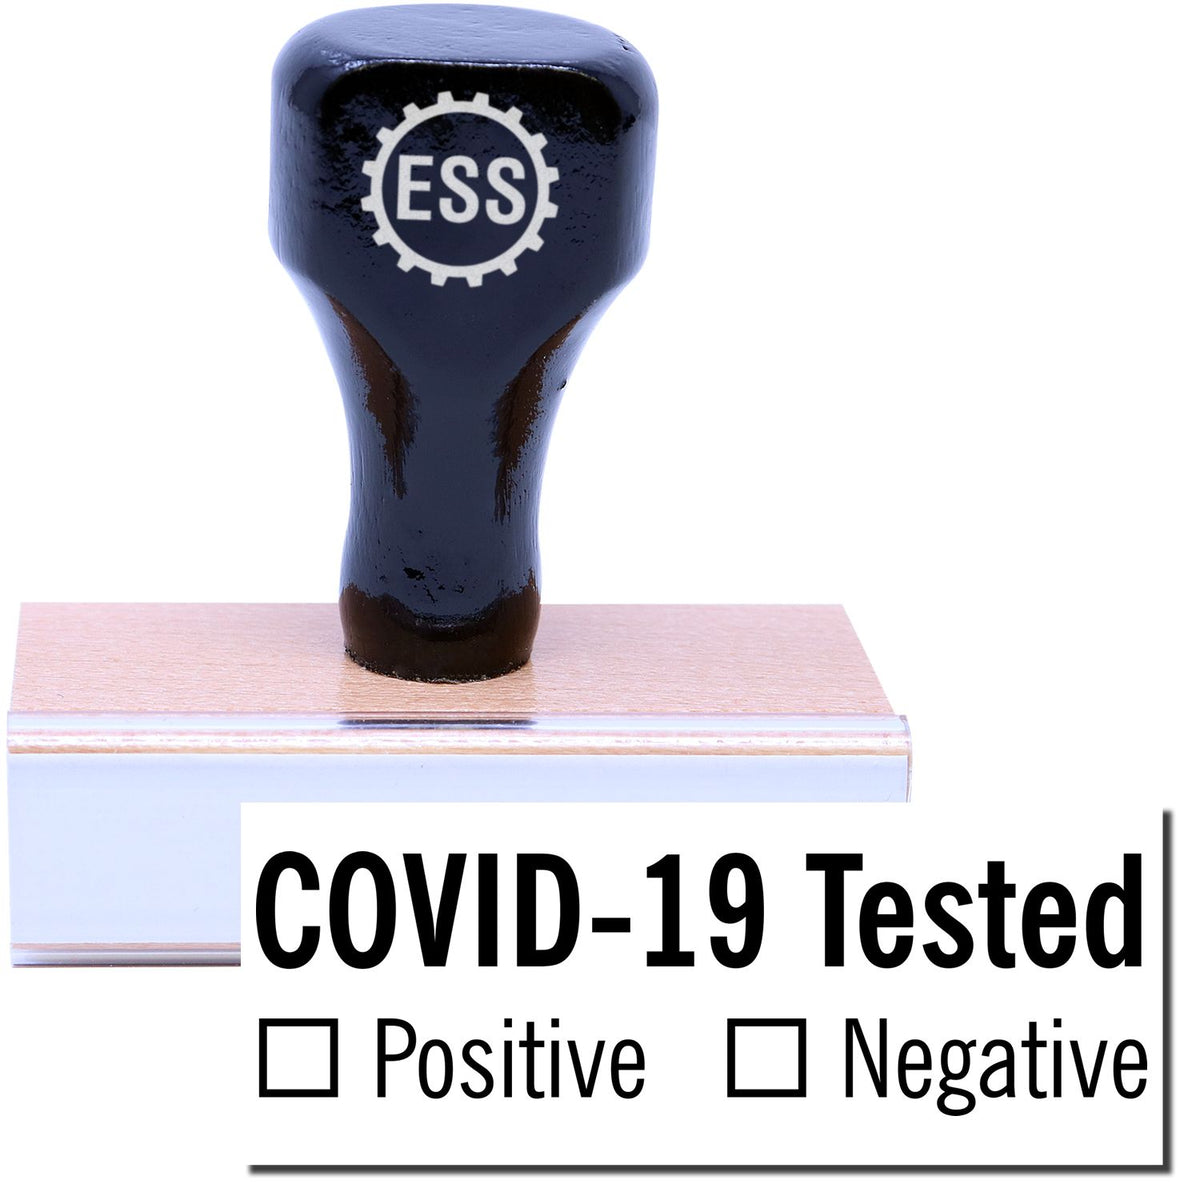 A stock office rubber stamp with a stamped image showing how the text &quot;COVID-19 Tested&quot; in a large font with a space underneath where a box can be checked based on whether a person is positive or negative for the virus is displayed after stamping.